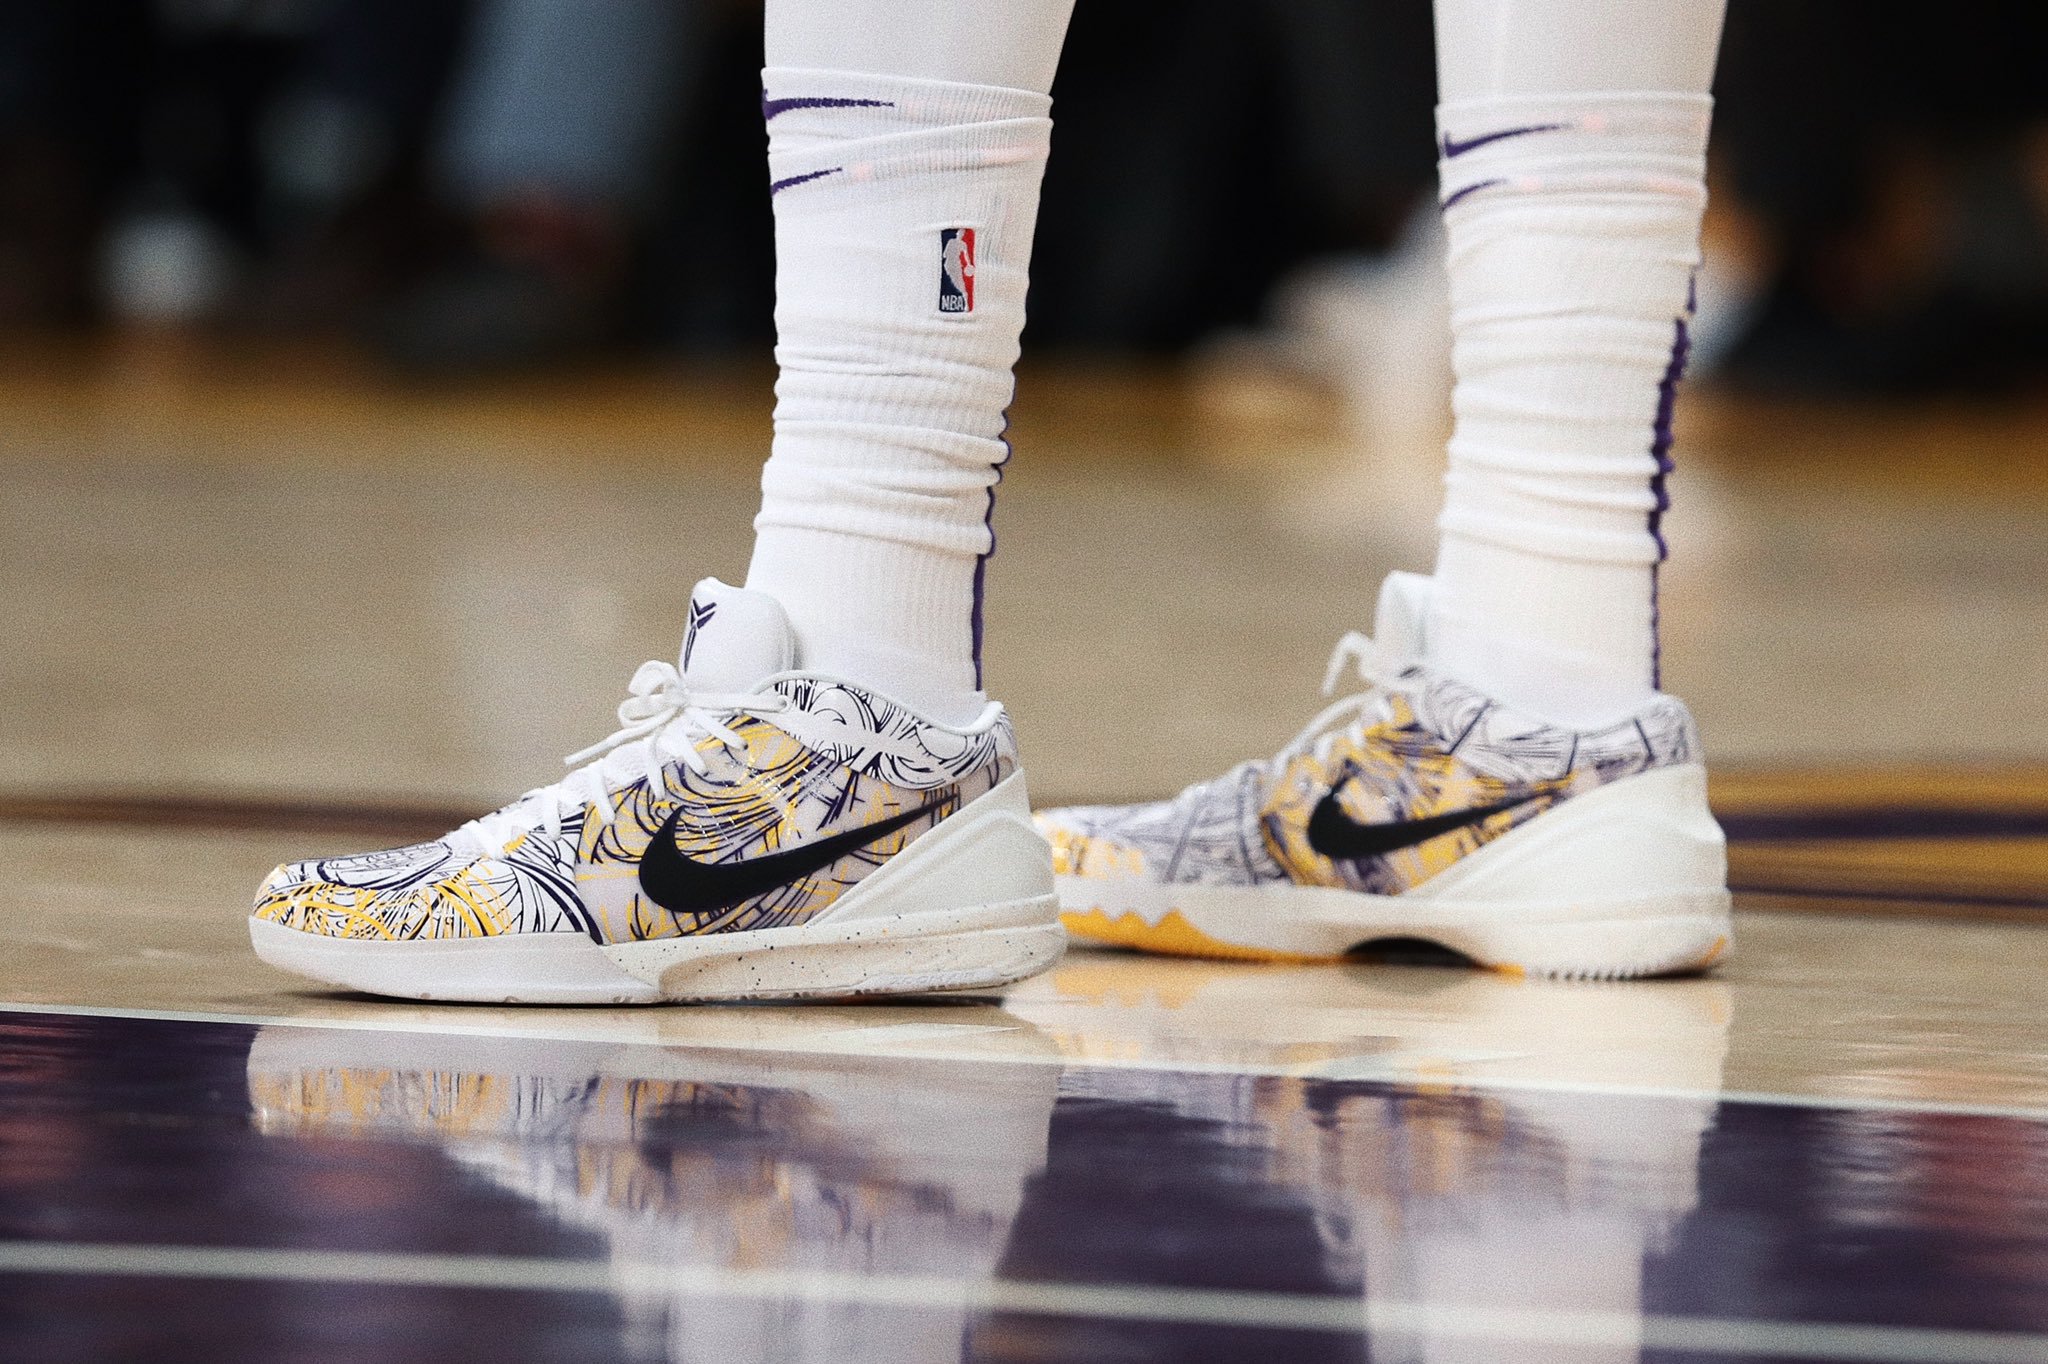 The first week of the NBA season was marked with the feast of colorful basketball shoes.